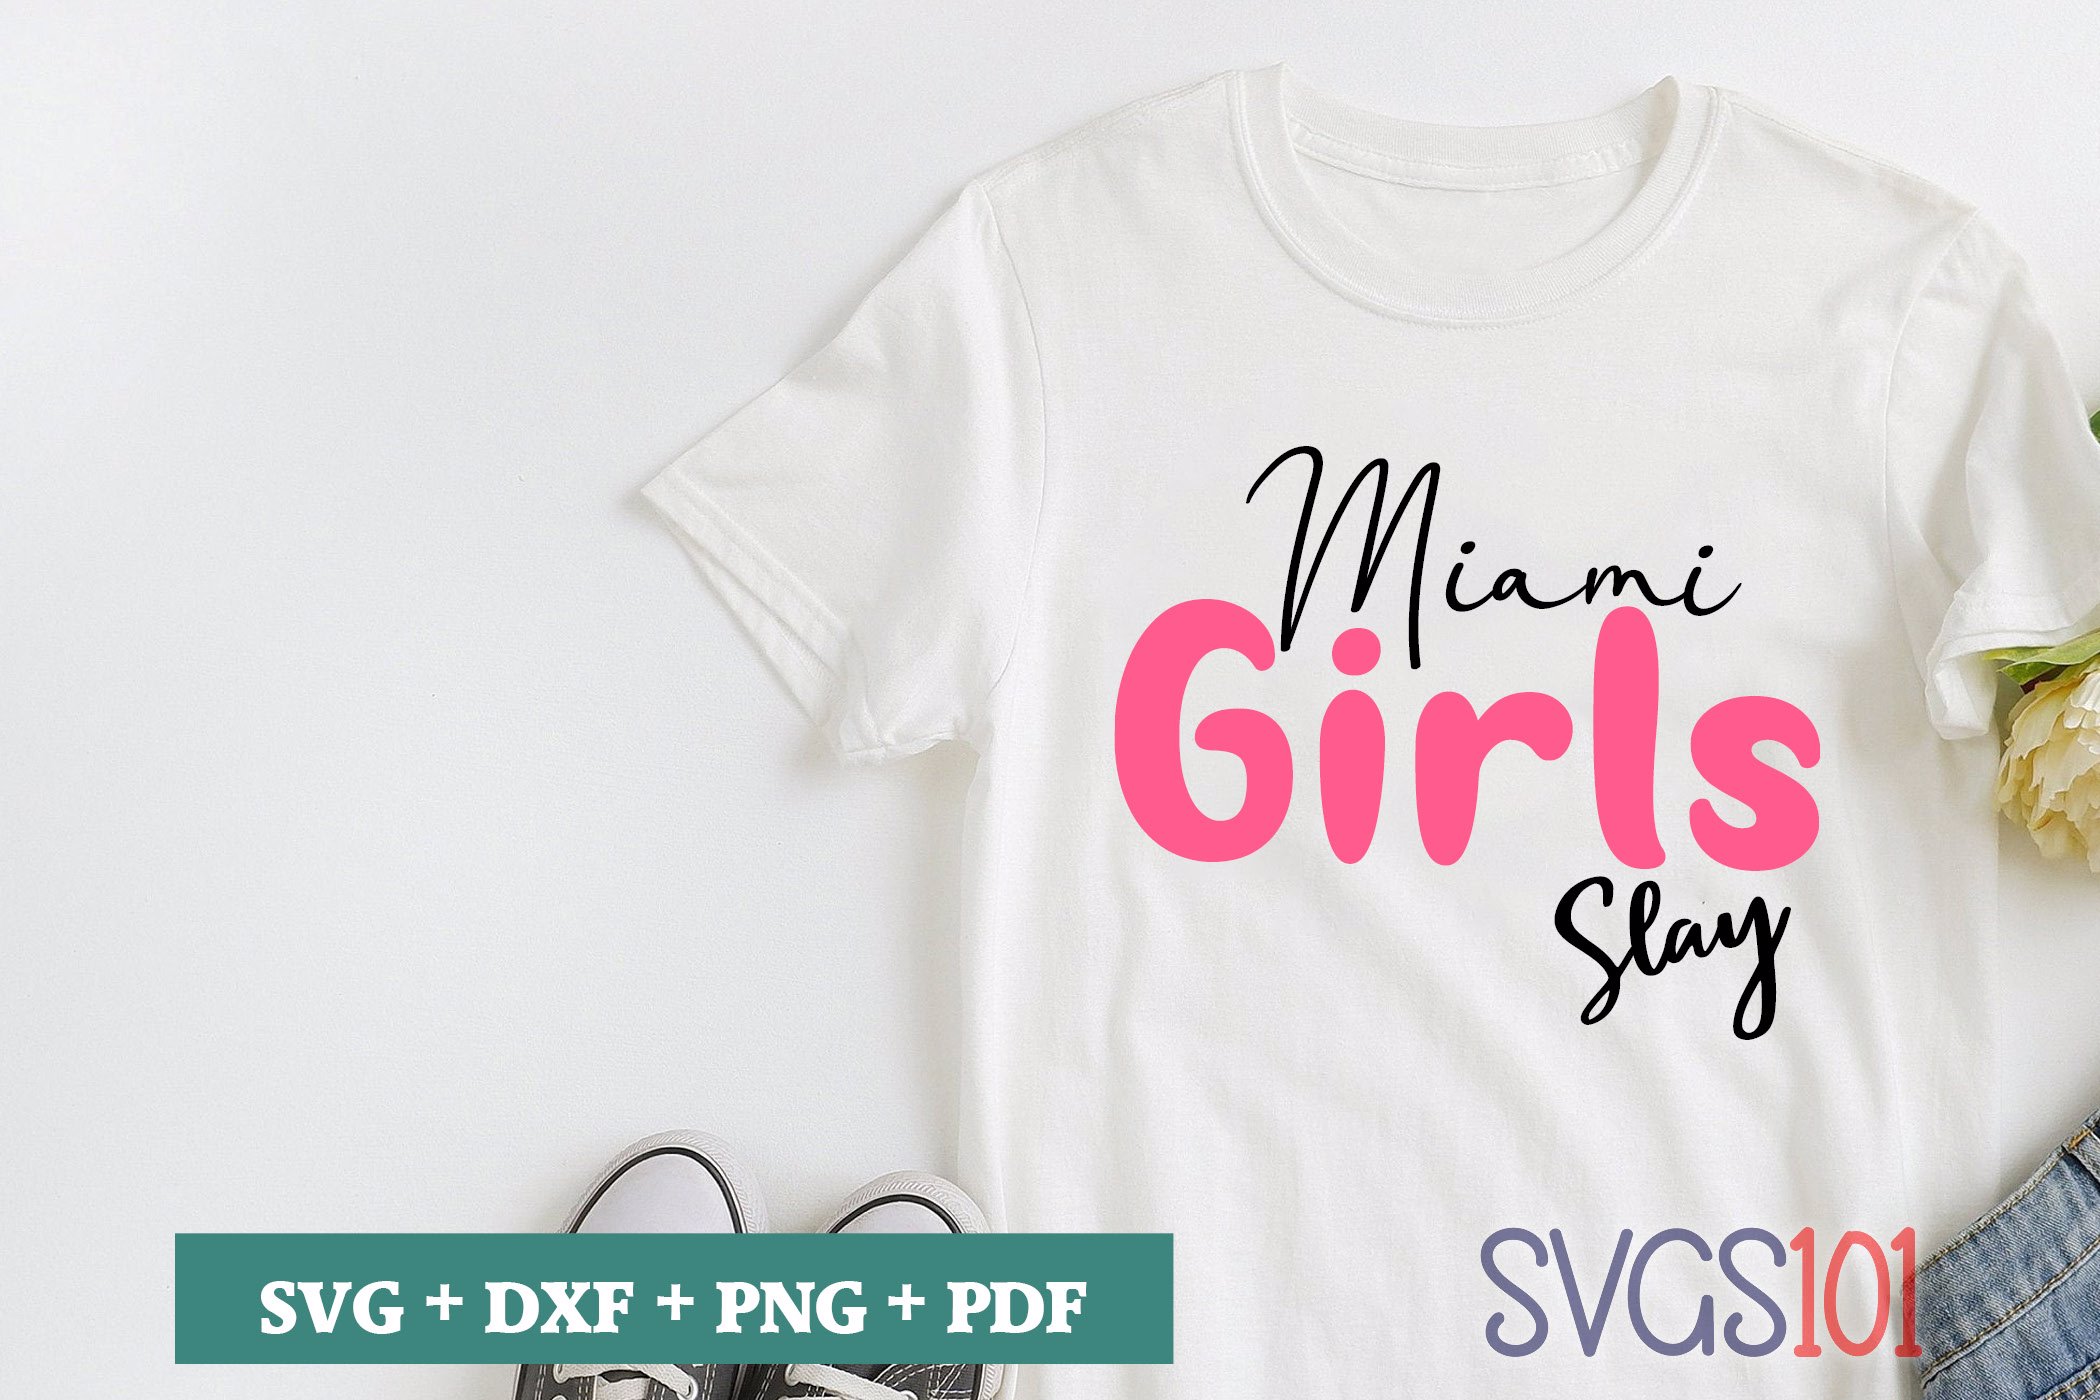 Download Miami Girls Slay SVG Cuttable file - DXF, EPS, PNG, PDF | SVG Cutting File